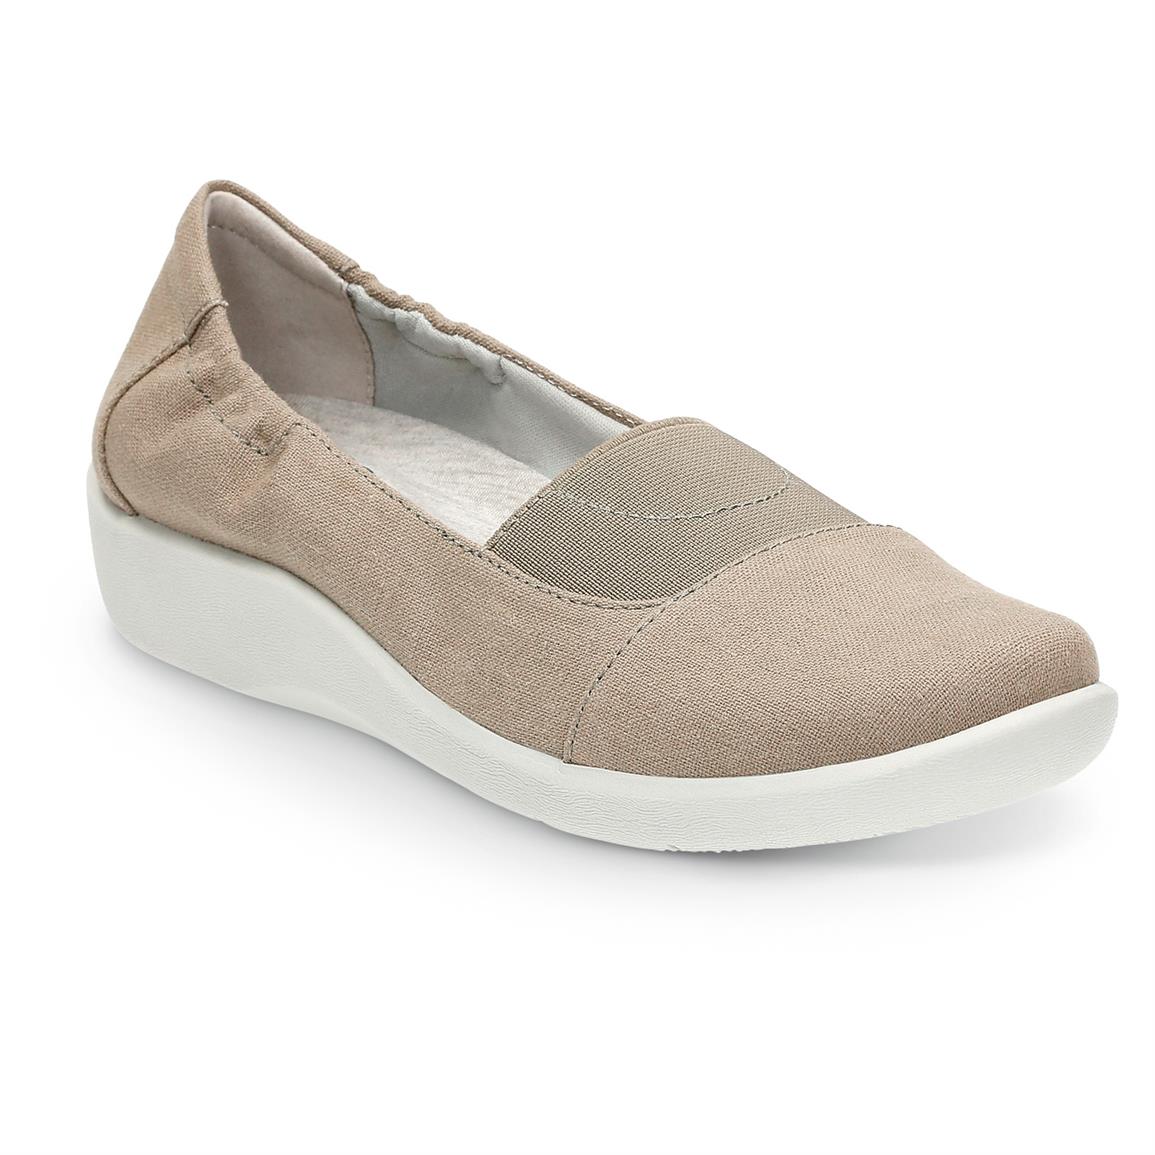 Clarks Women's Sillian Sune Slip-On Shoes - 657303, Casual Shoes at ...